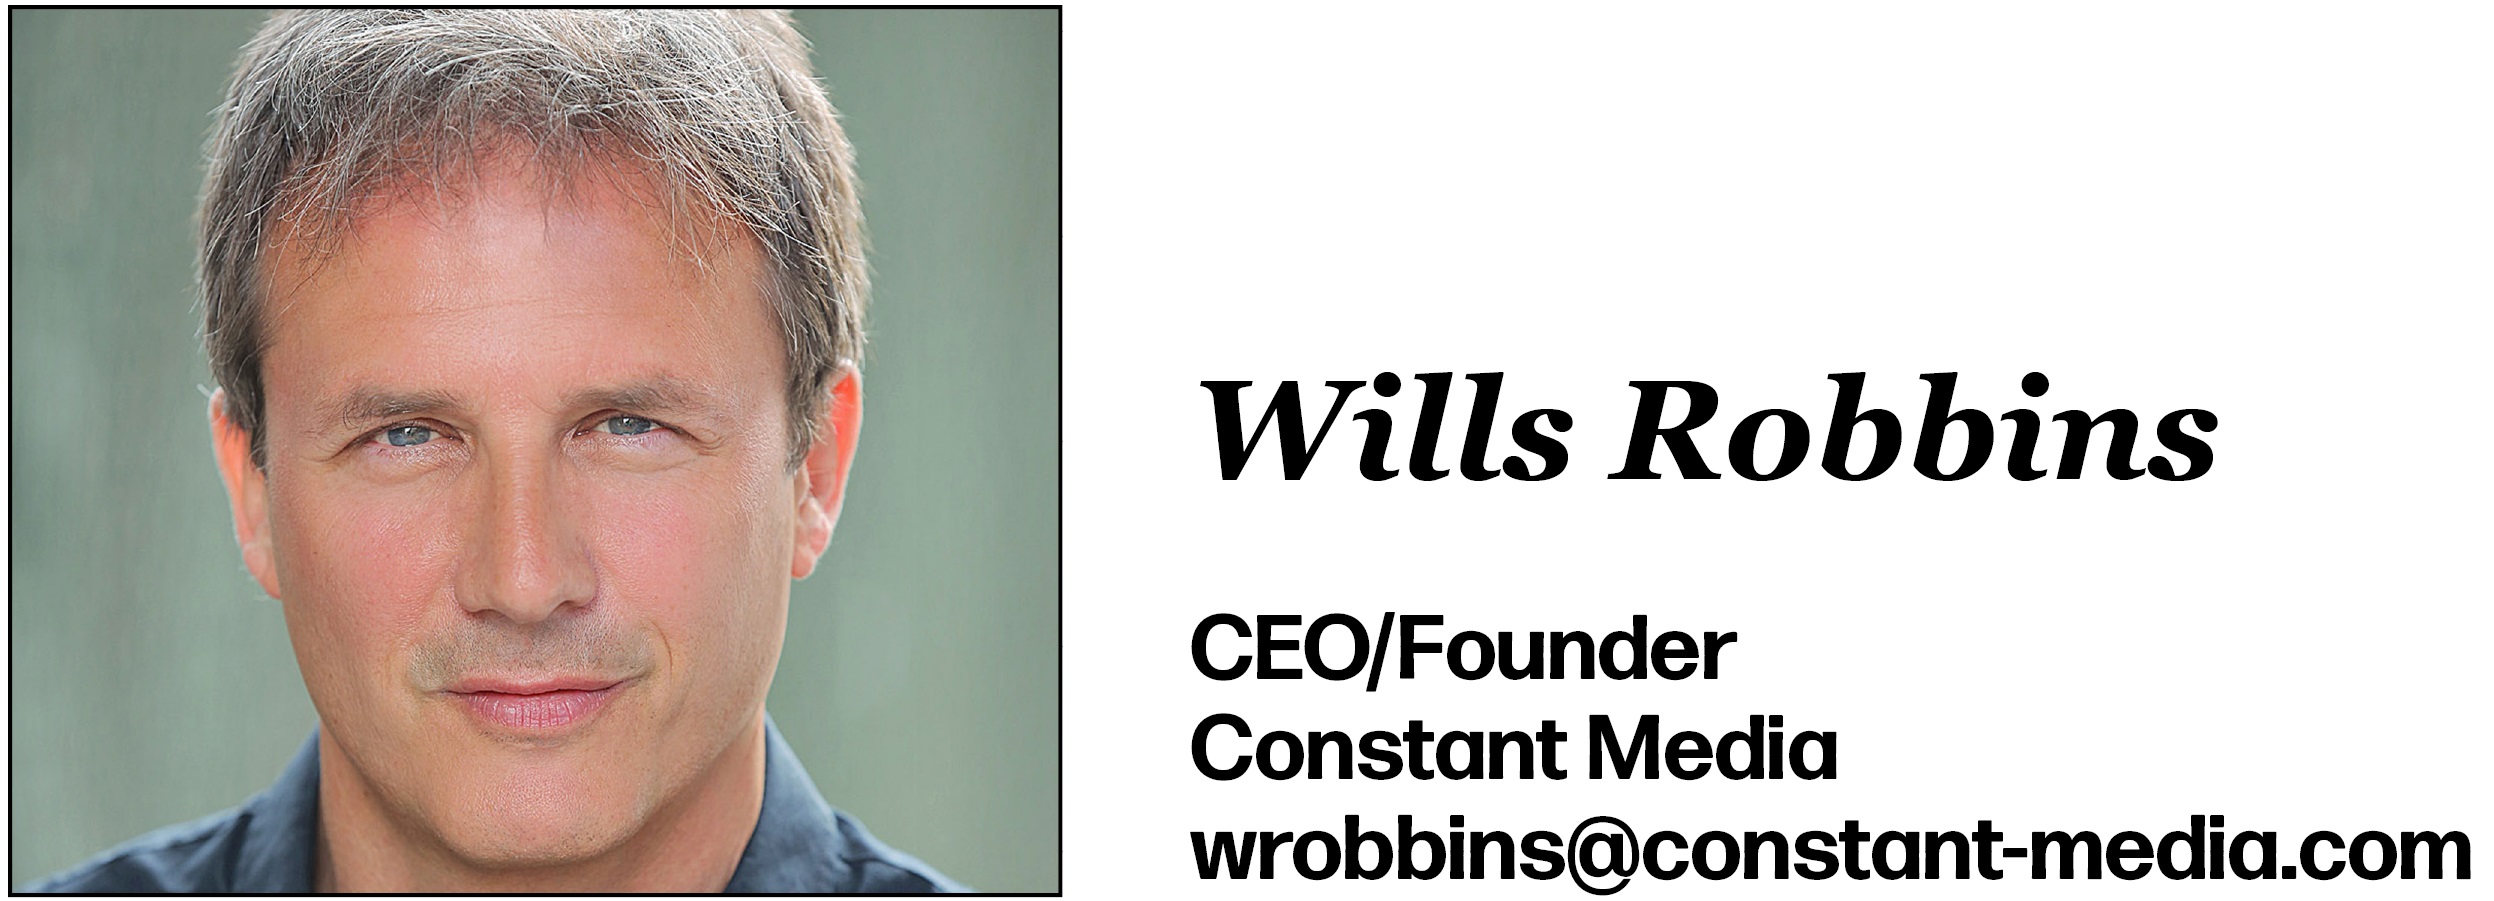 Wills Robbins is CEO/Founder at Constant Media. His email is wrobbins@constant-media.com.